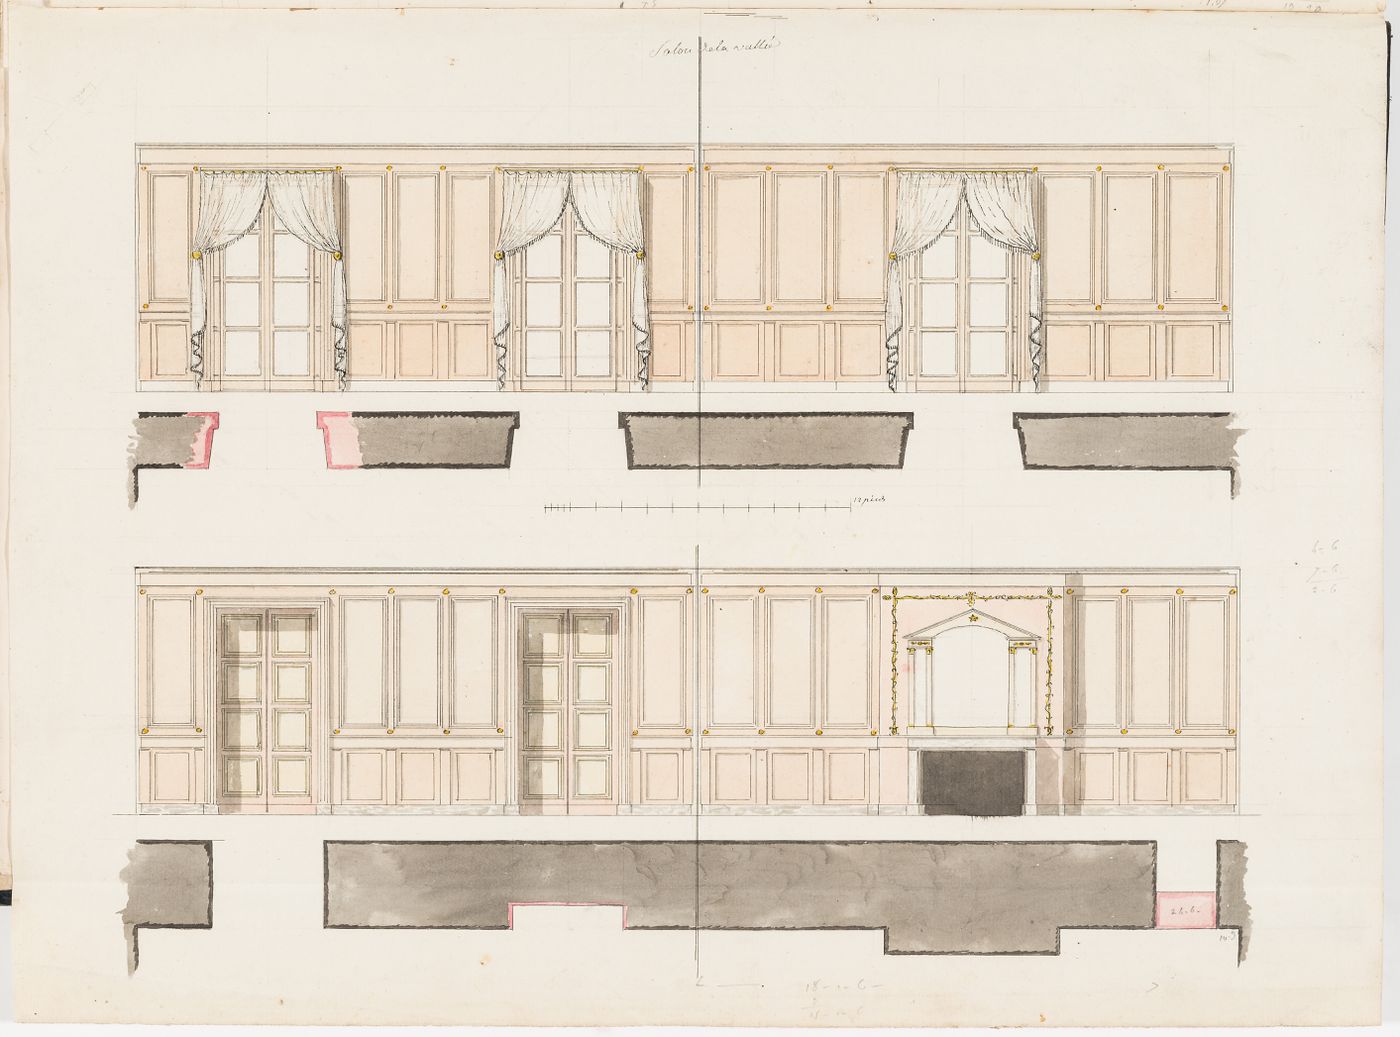 Elevations and partial plans for the salon of the house, Domaine de La Vallée; verso: Plans and sections for entrance steps on a terrace, possibly for the house, Domaine de La Vallée